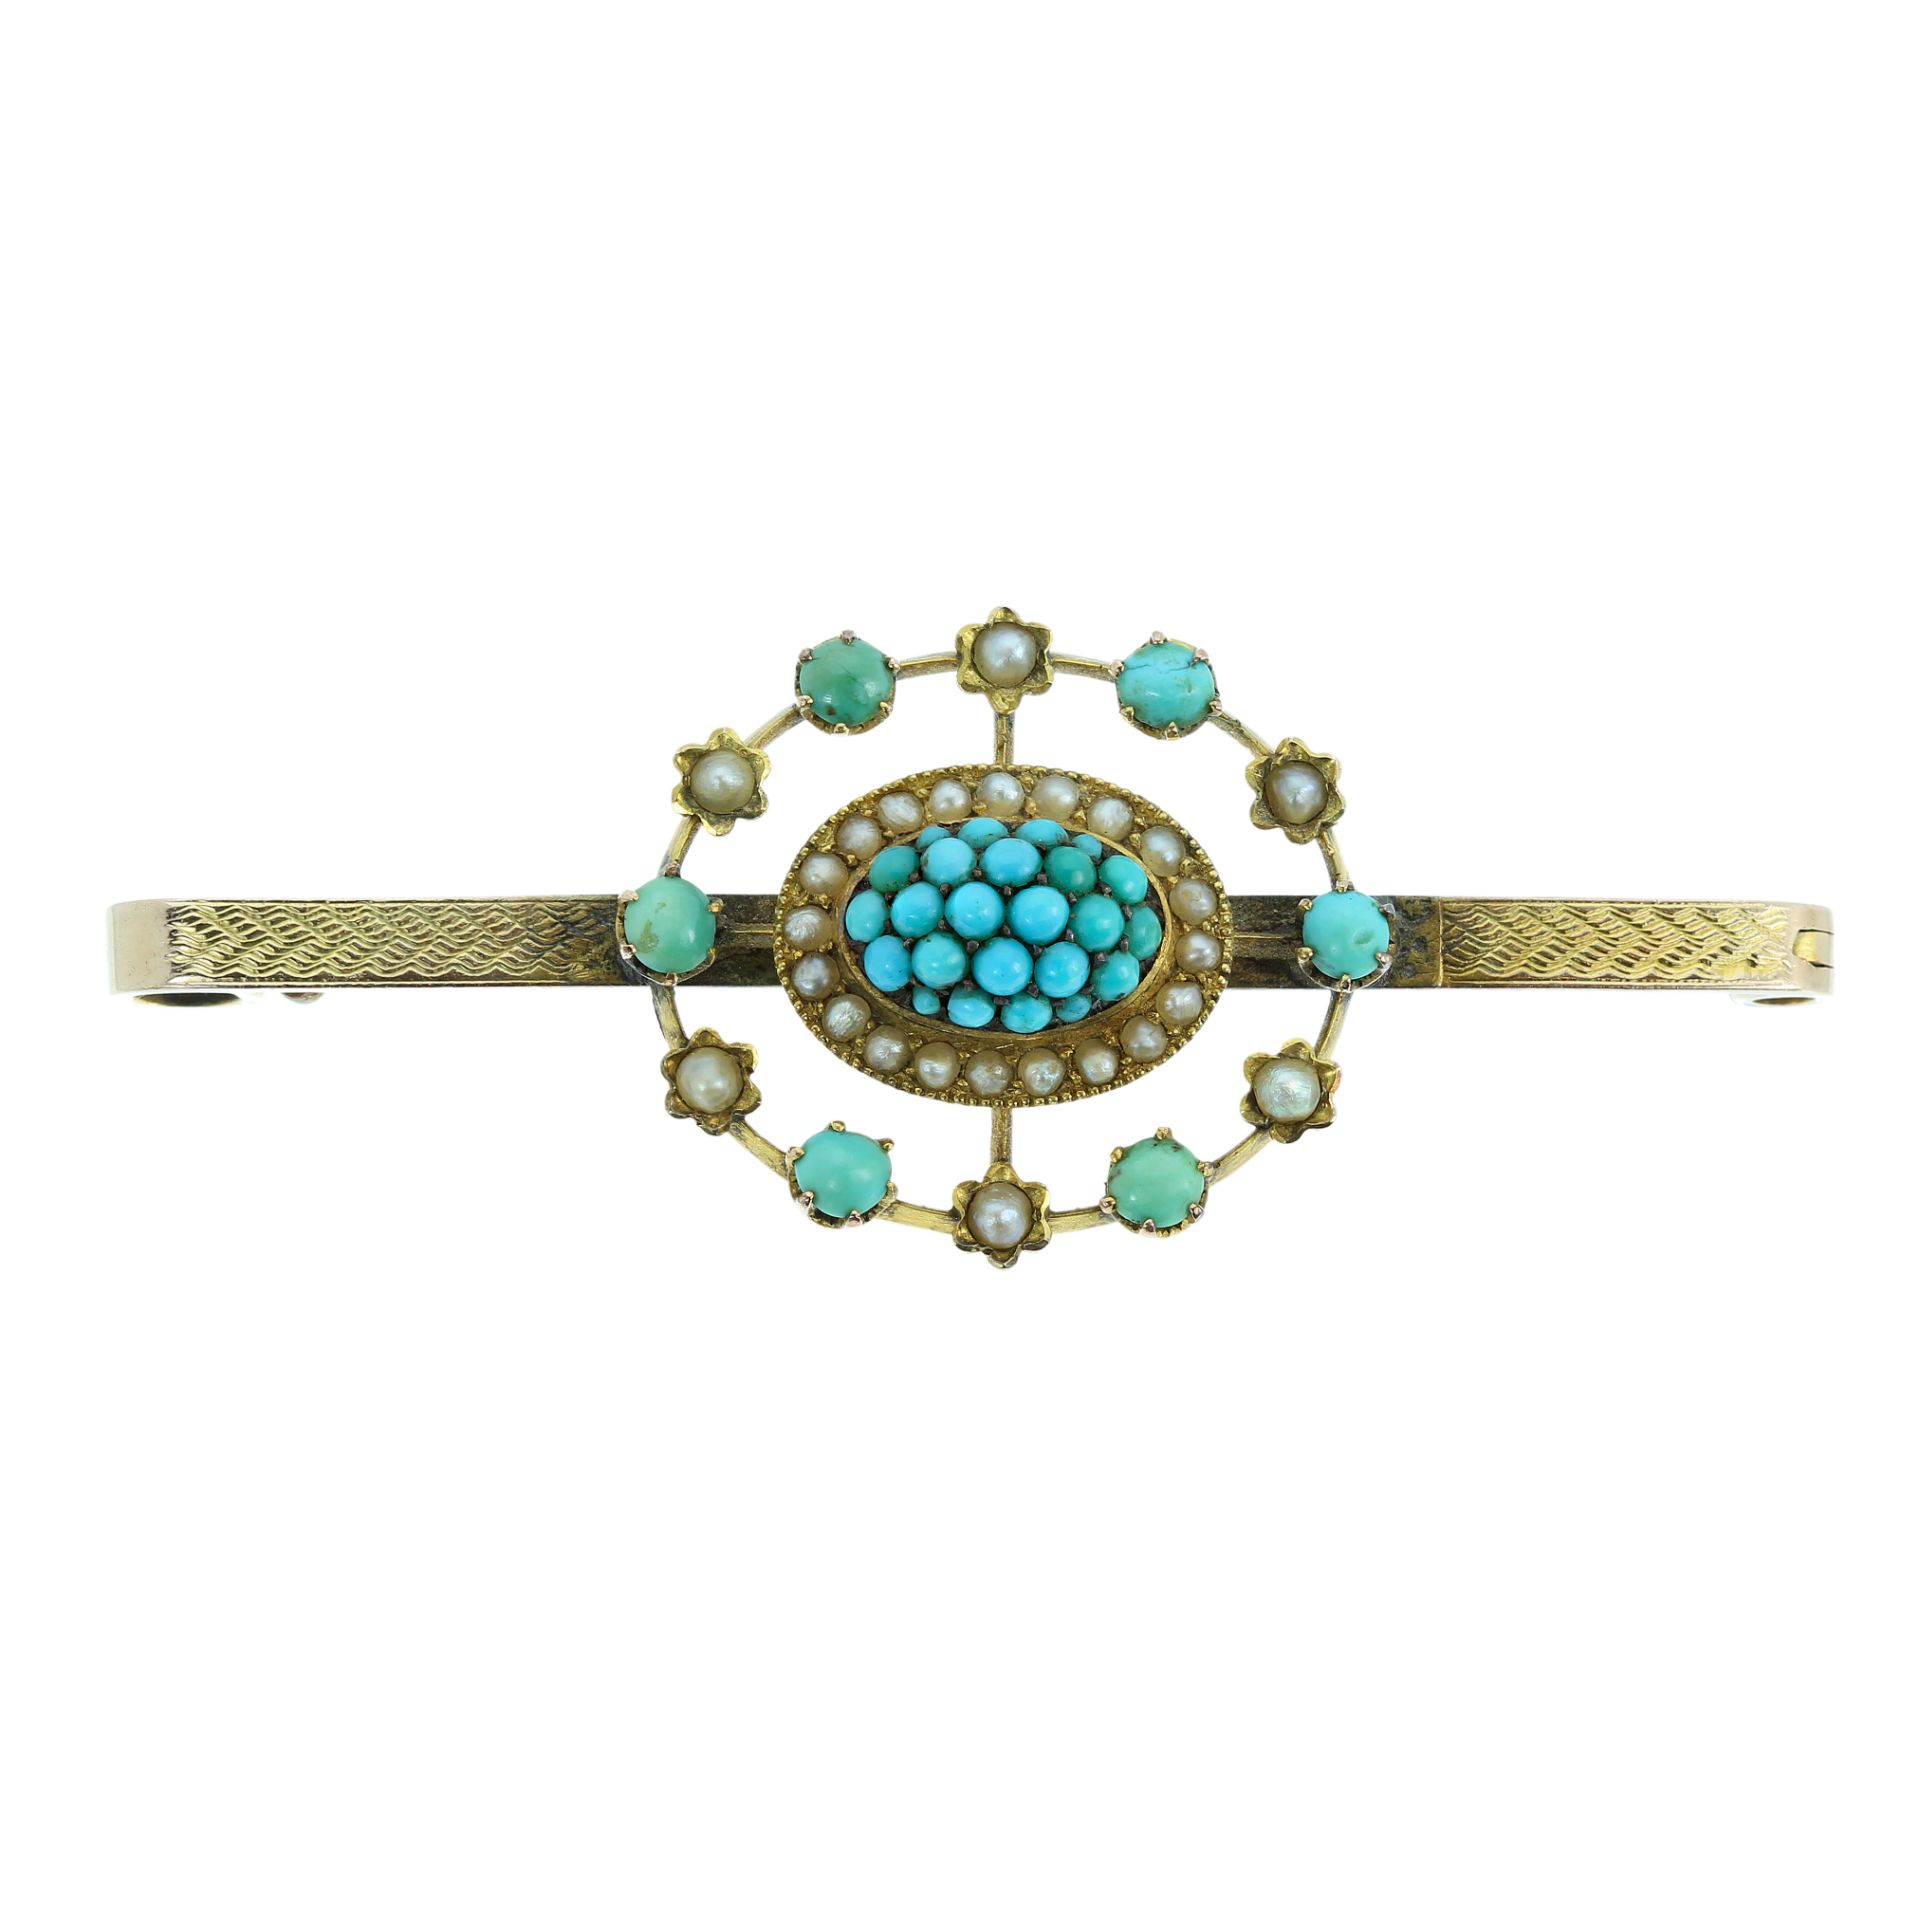 AN ANTIQUE TURQUOISE AND PEARL BEAD BROOCH in yellow gold, set with a central turquoise berry